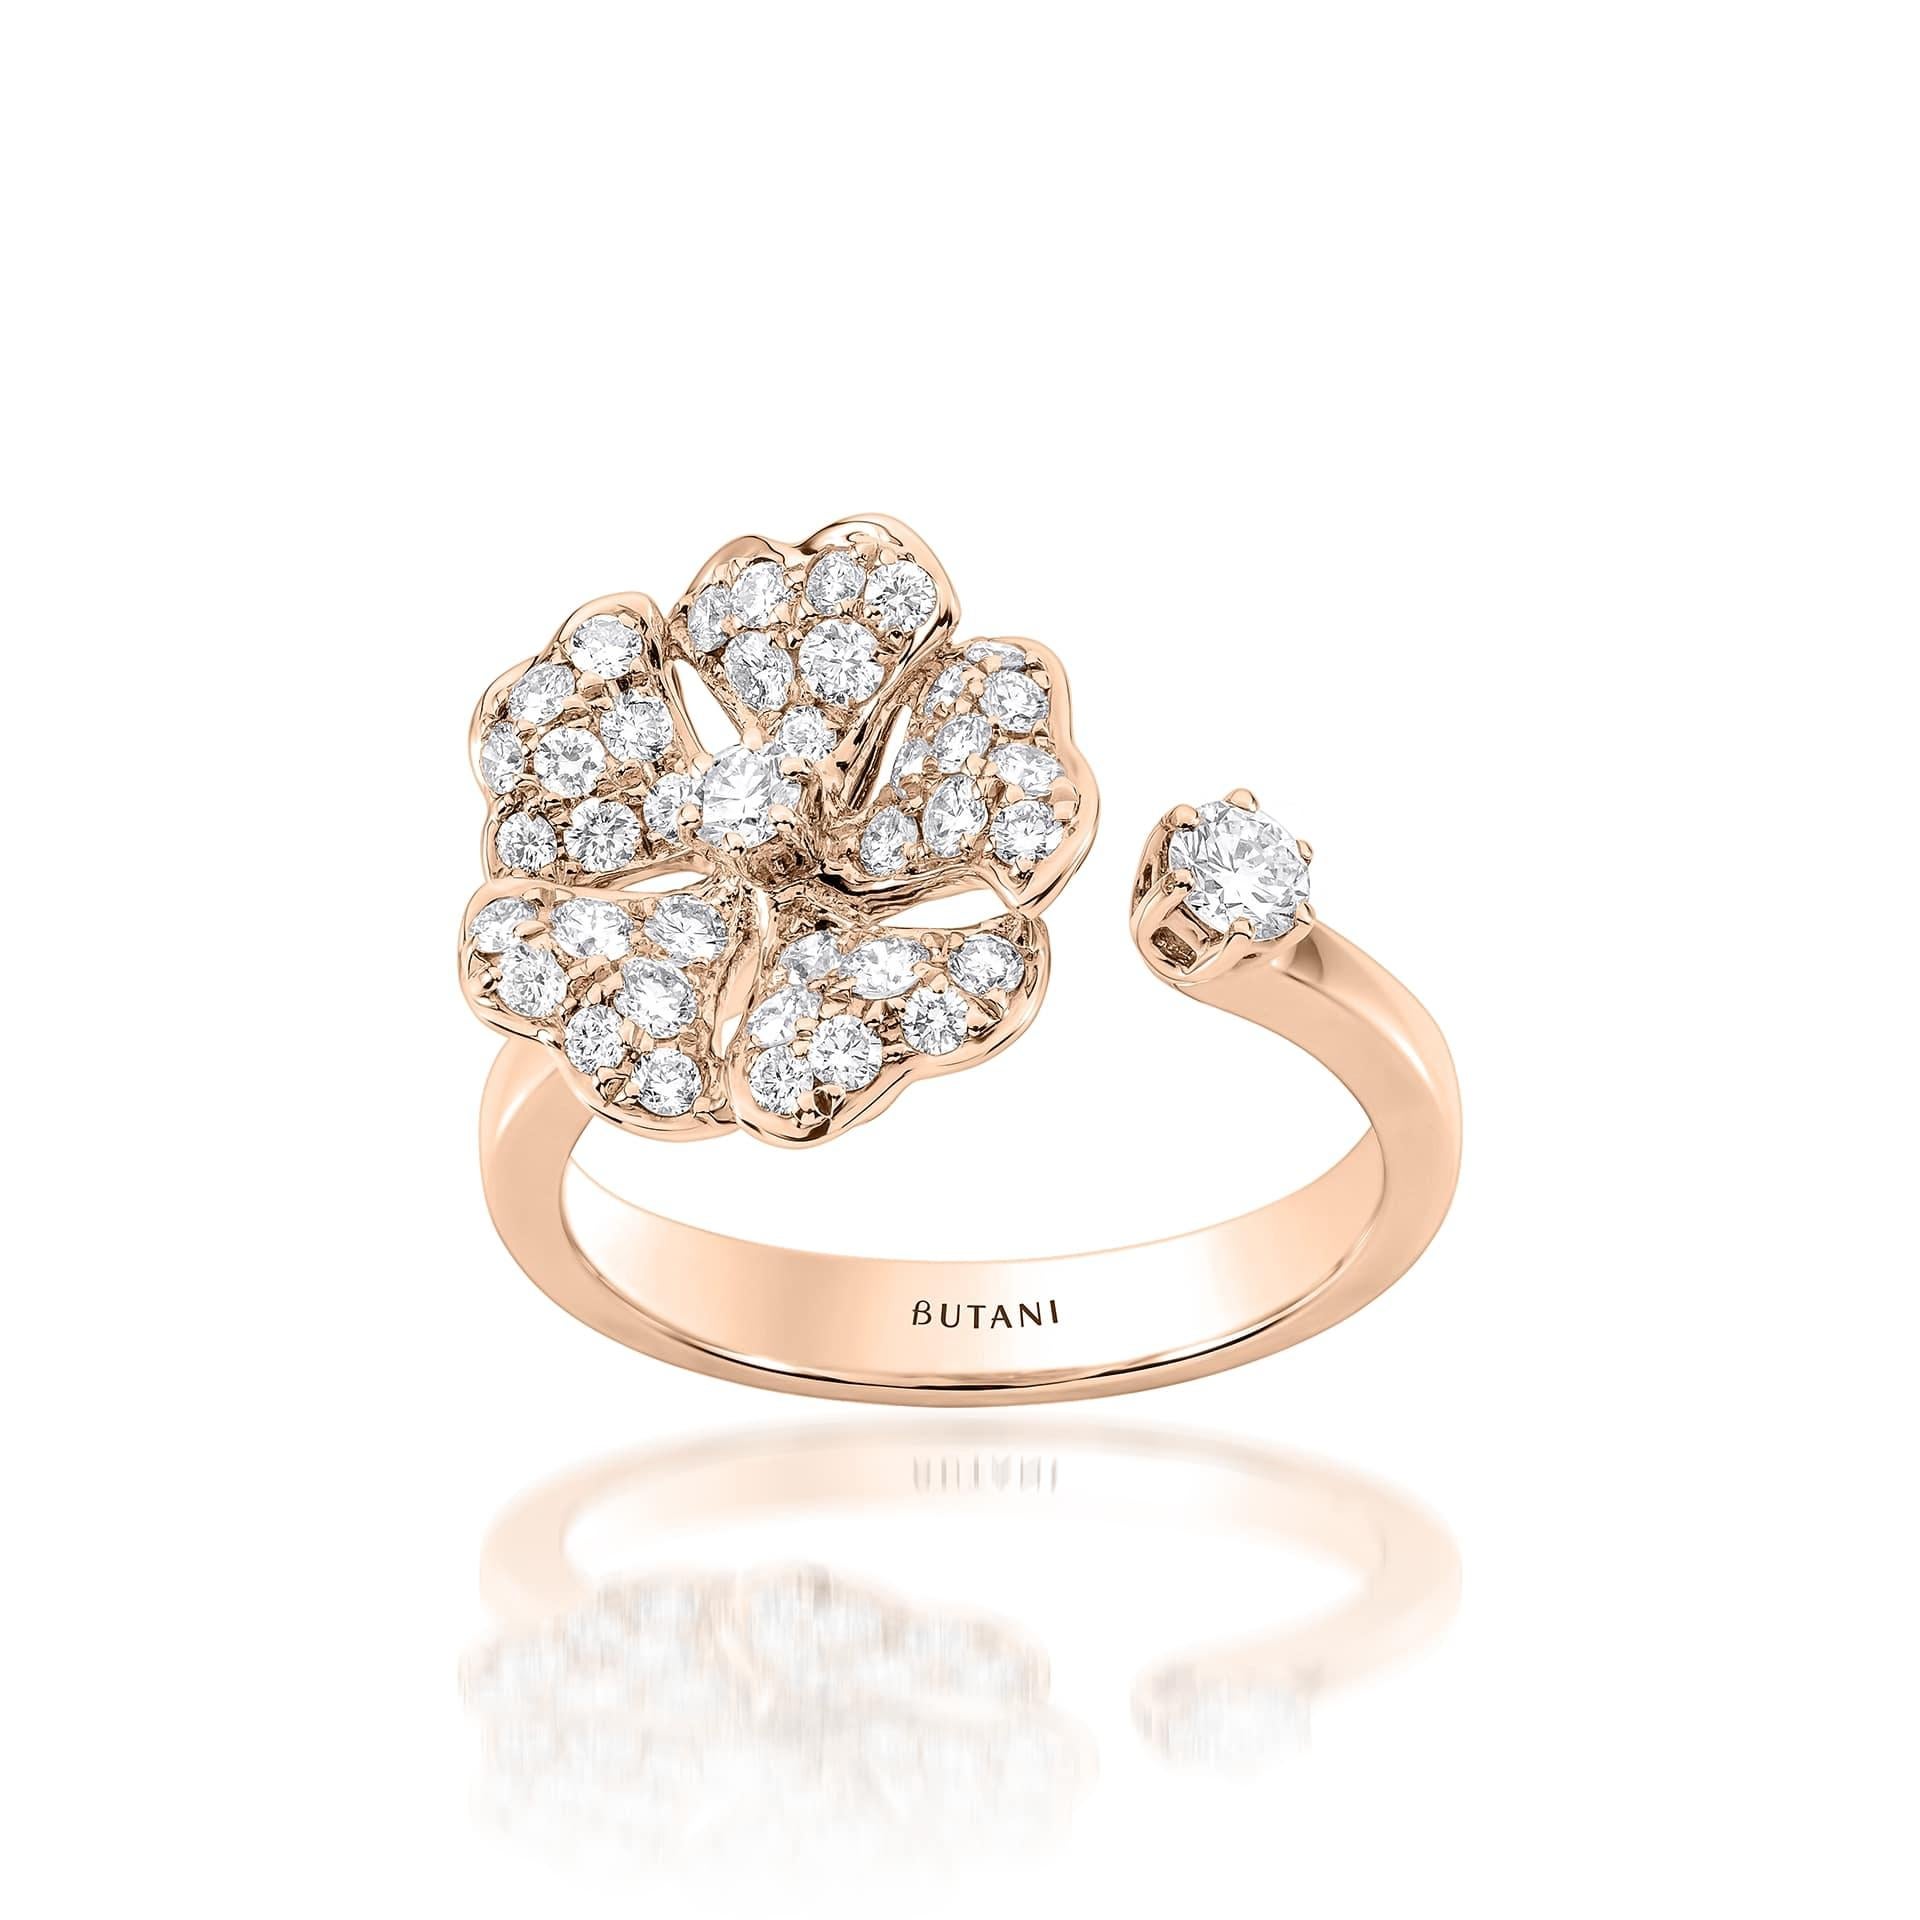 Bloom Gold and Pavé Diamond Open Ring in 18K Rose Gold

Inspired by the exquisite petals of the alpine cinquefoil flower, the Bloom collection combines the richness of diamonds and precious metals with the light versatility of this delicate,